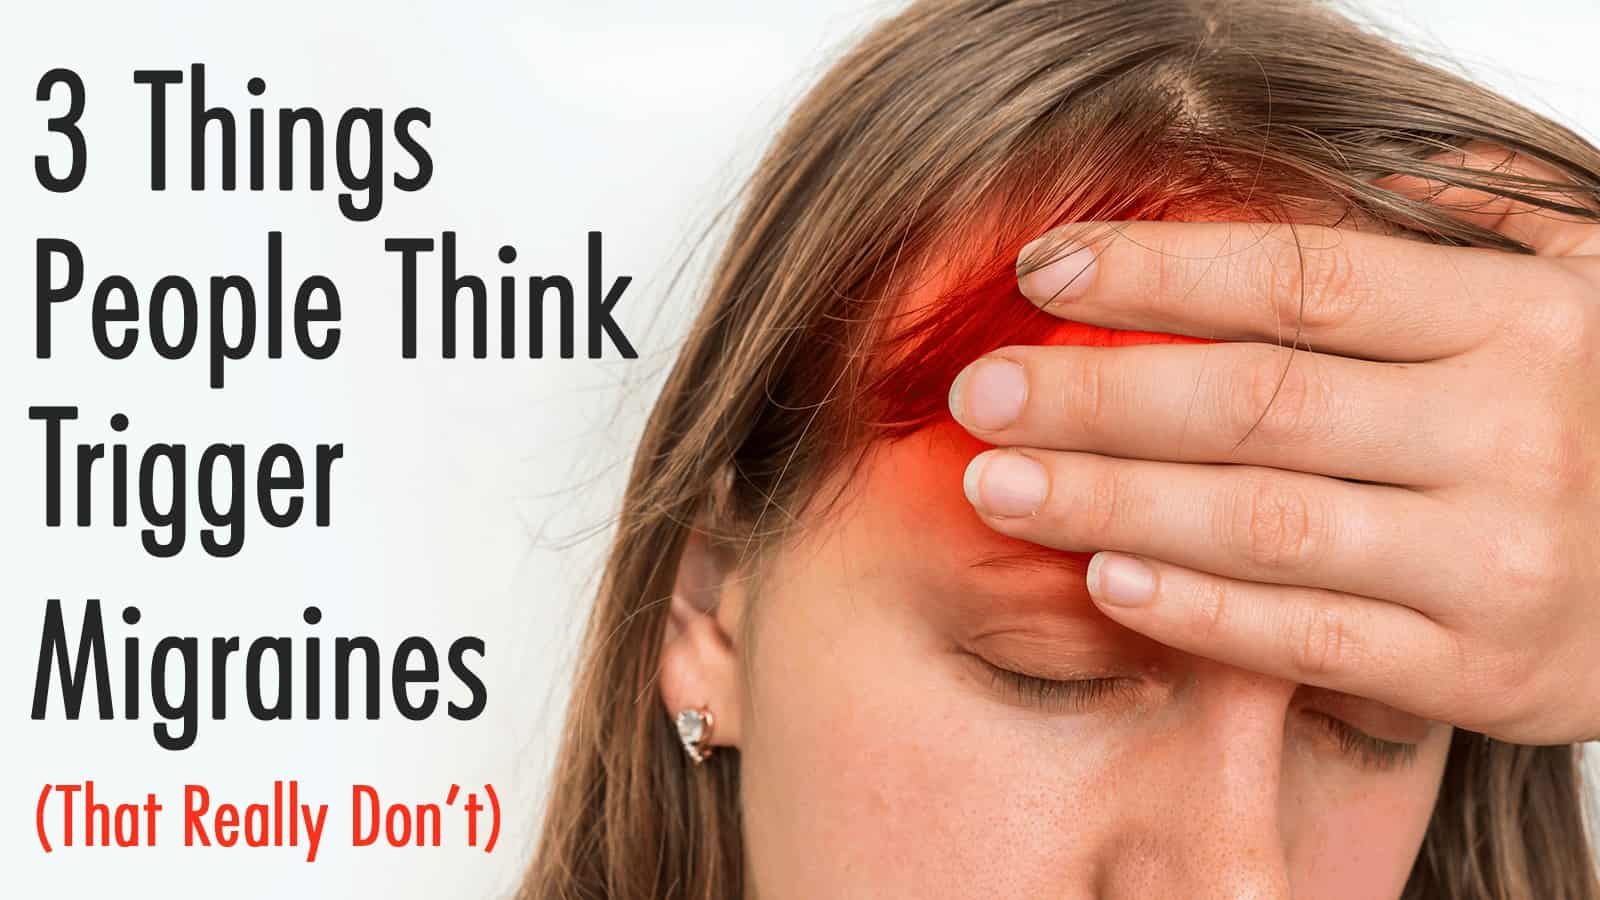 3 Things People Think Trigger Migraines (That Really Don’t)